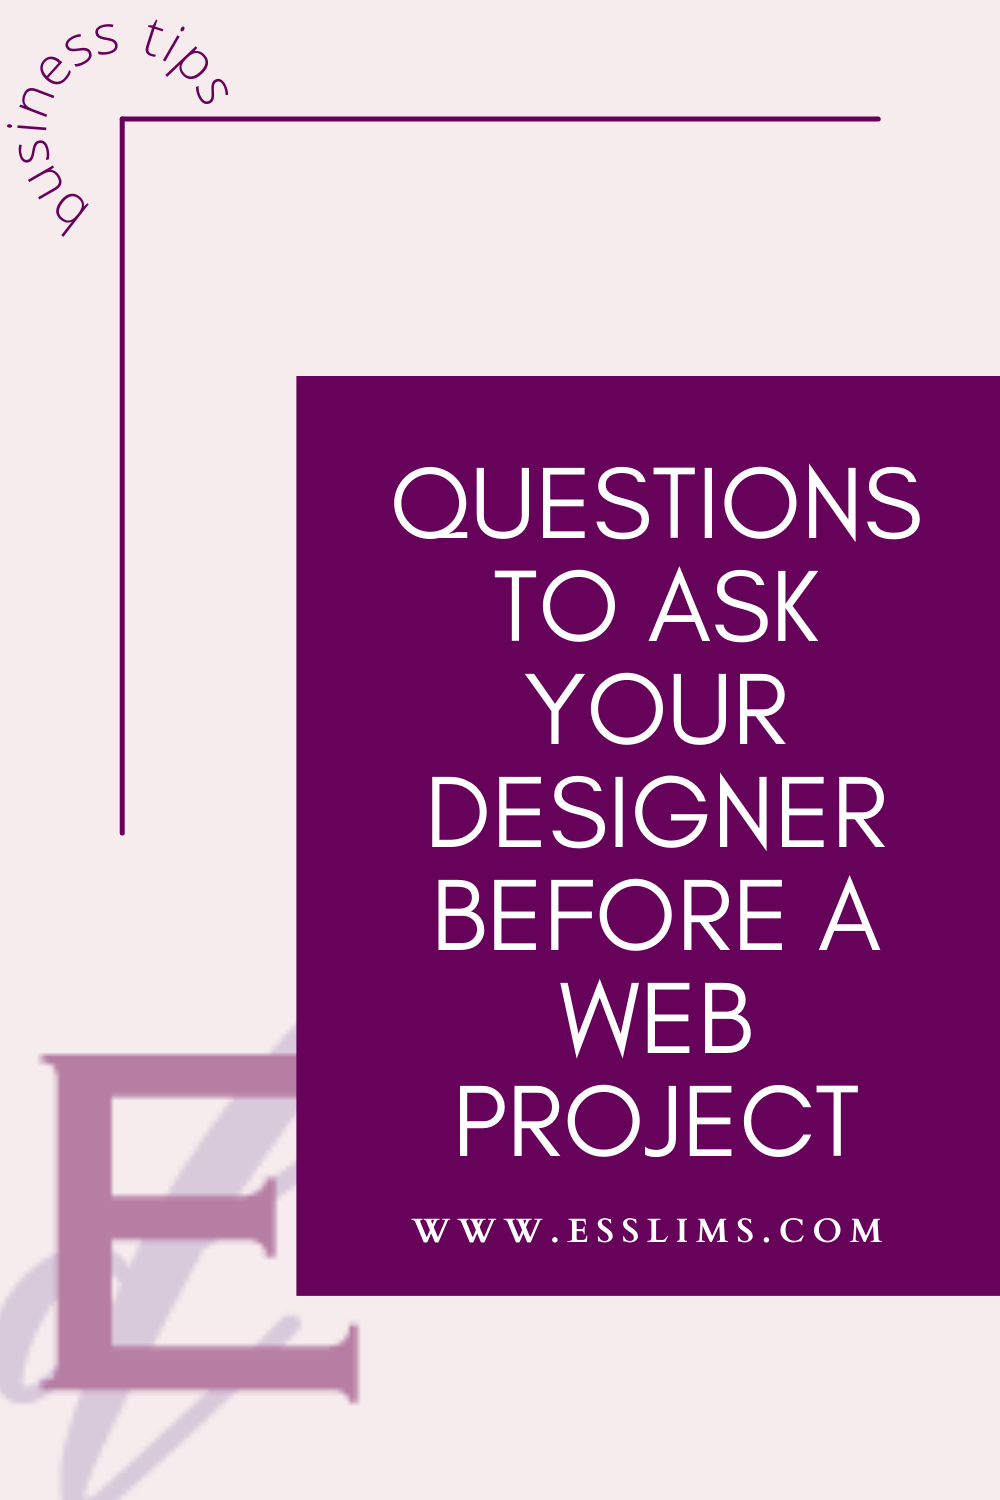 Questions to ask your designer before a web project